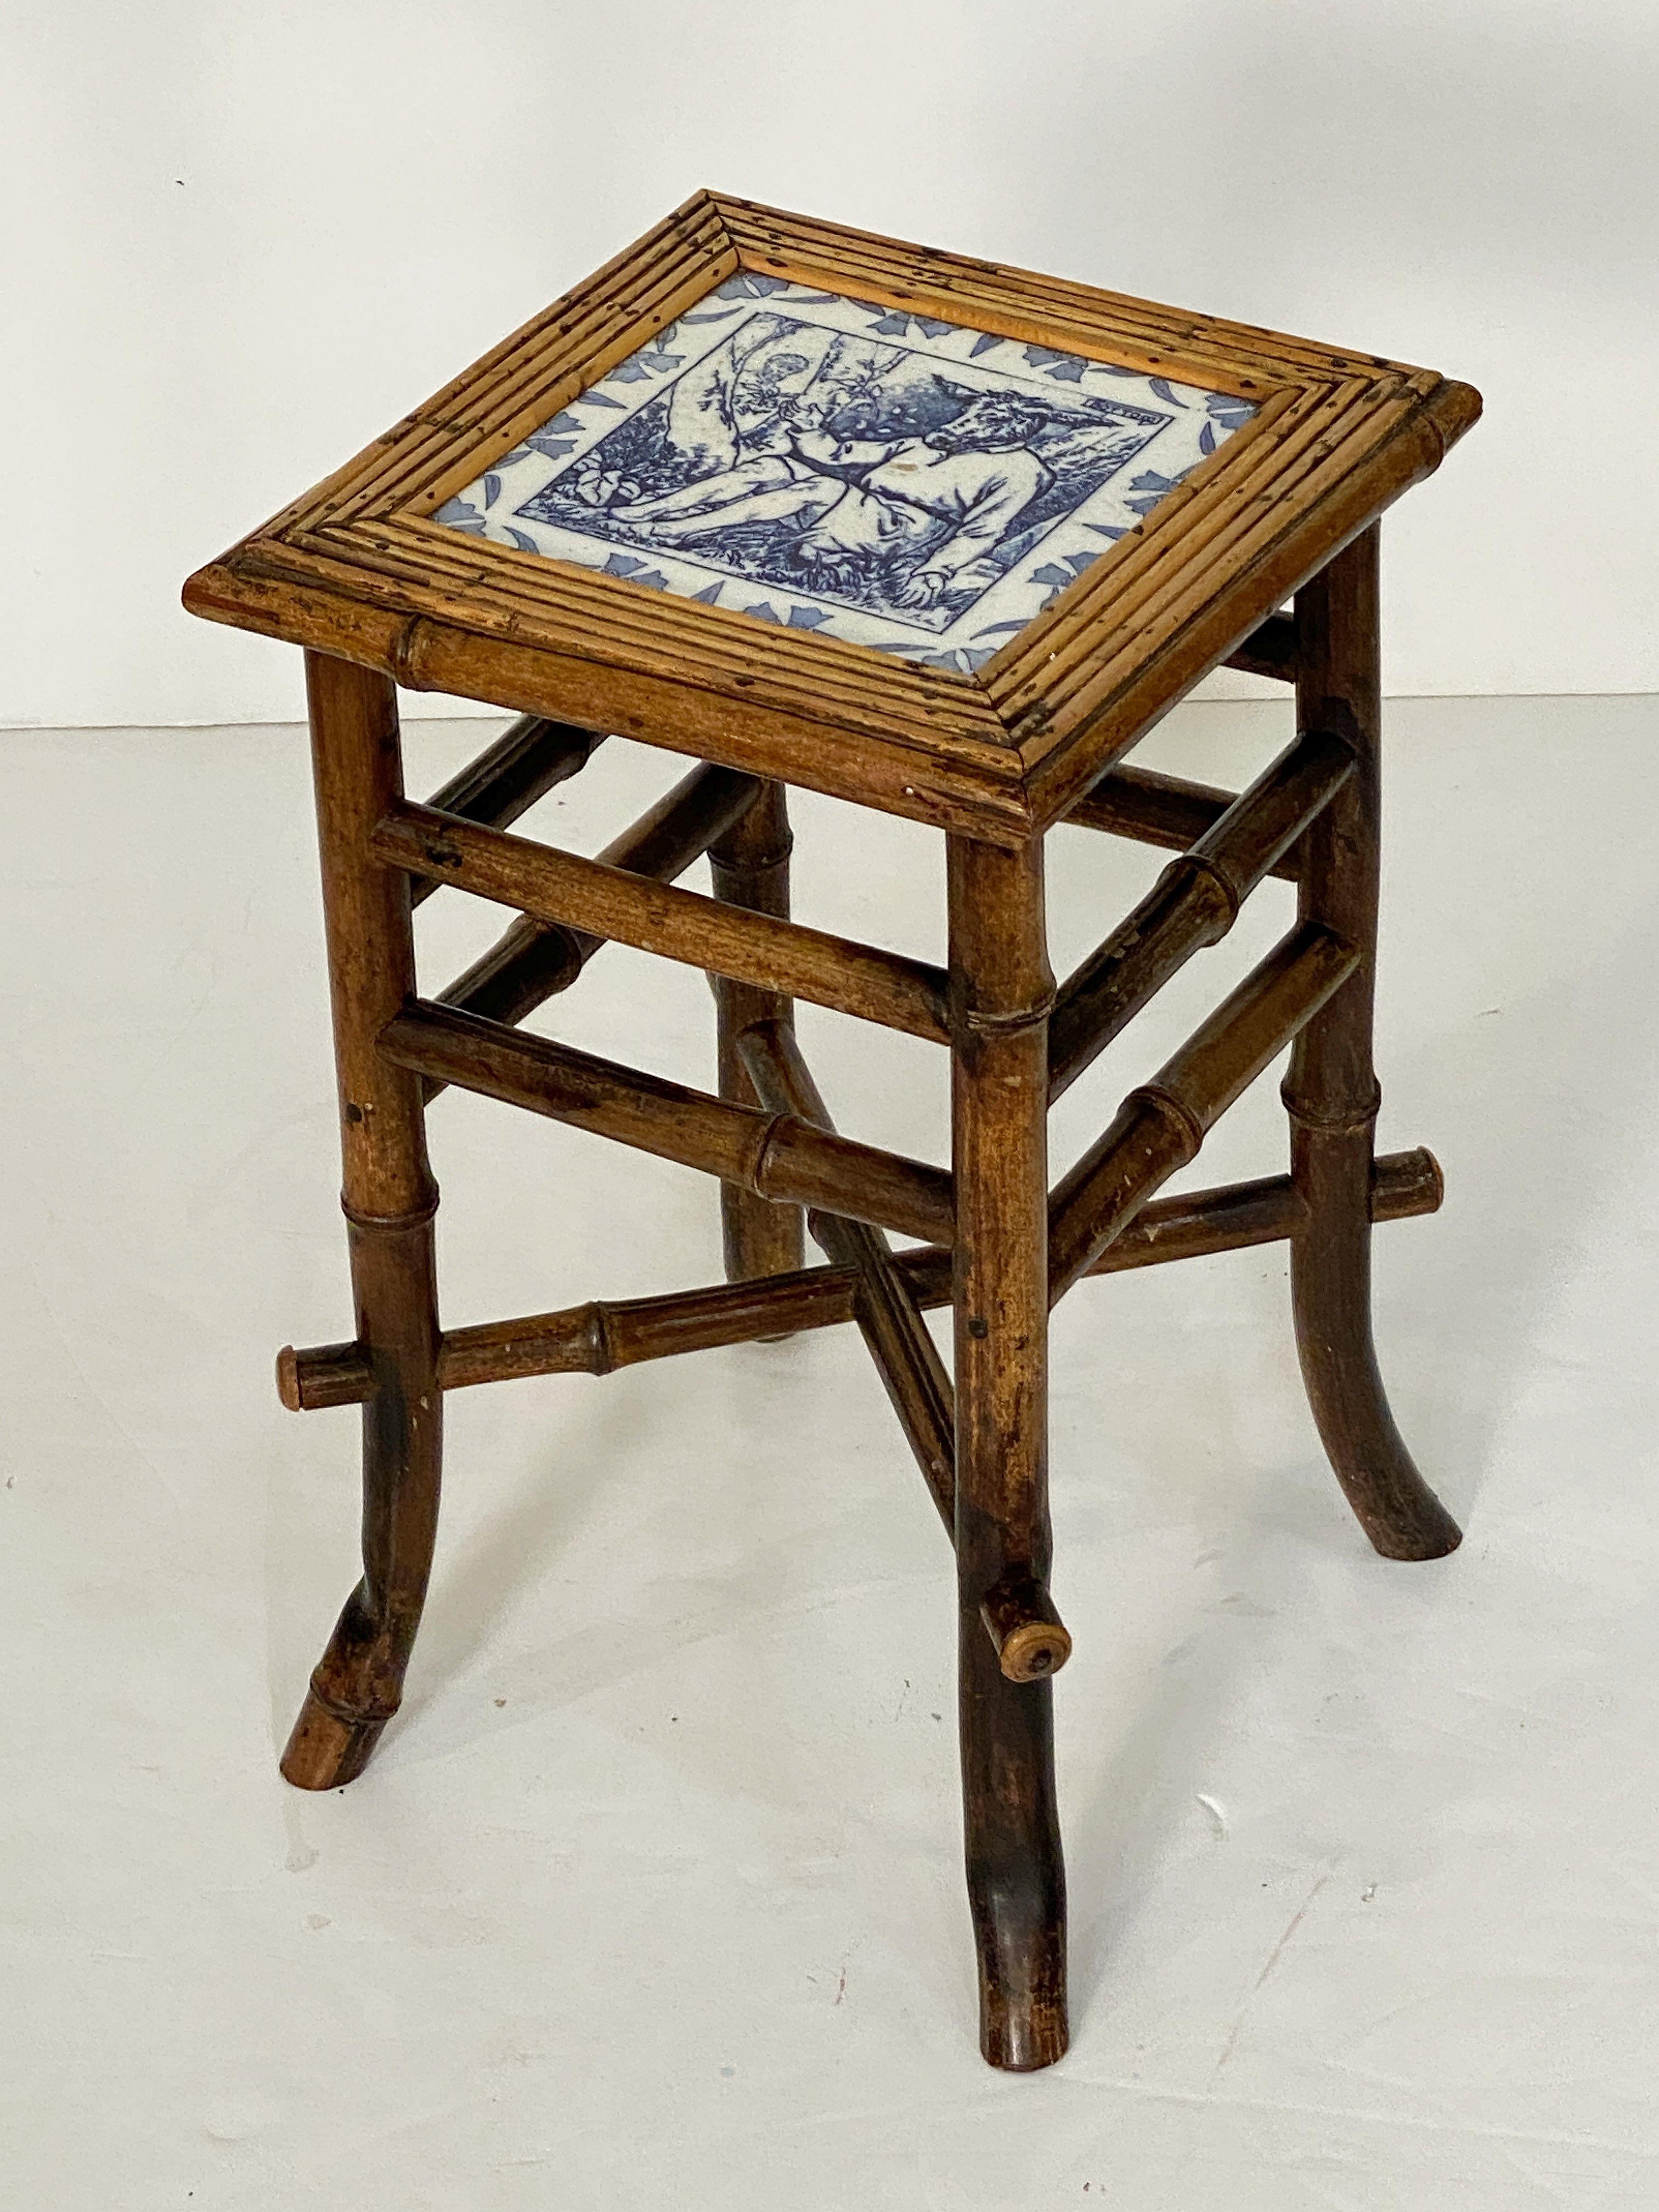 19th Century English Bamboo Table or Stool with Tile Seat from the Aesthetic Movement Era For Sale